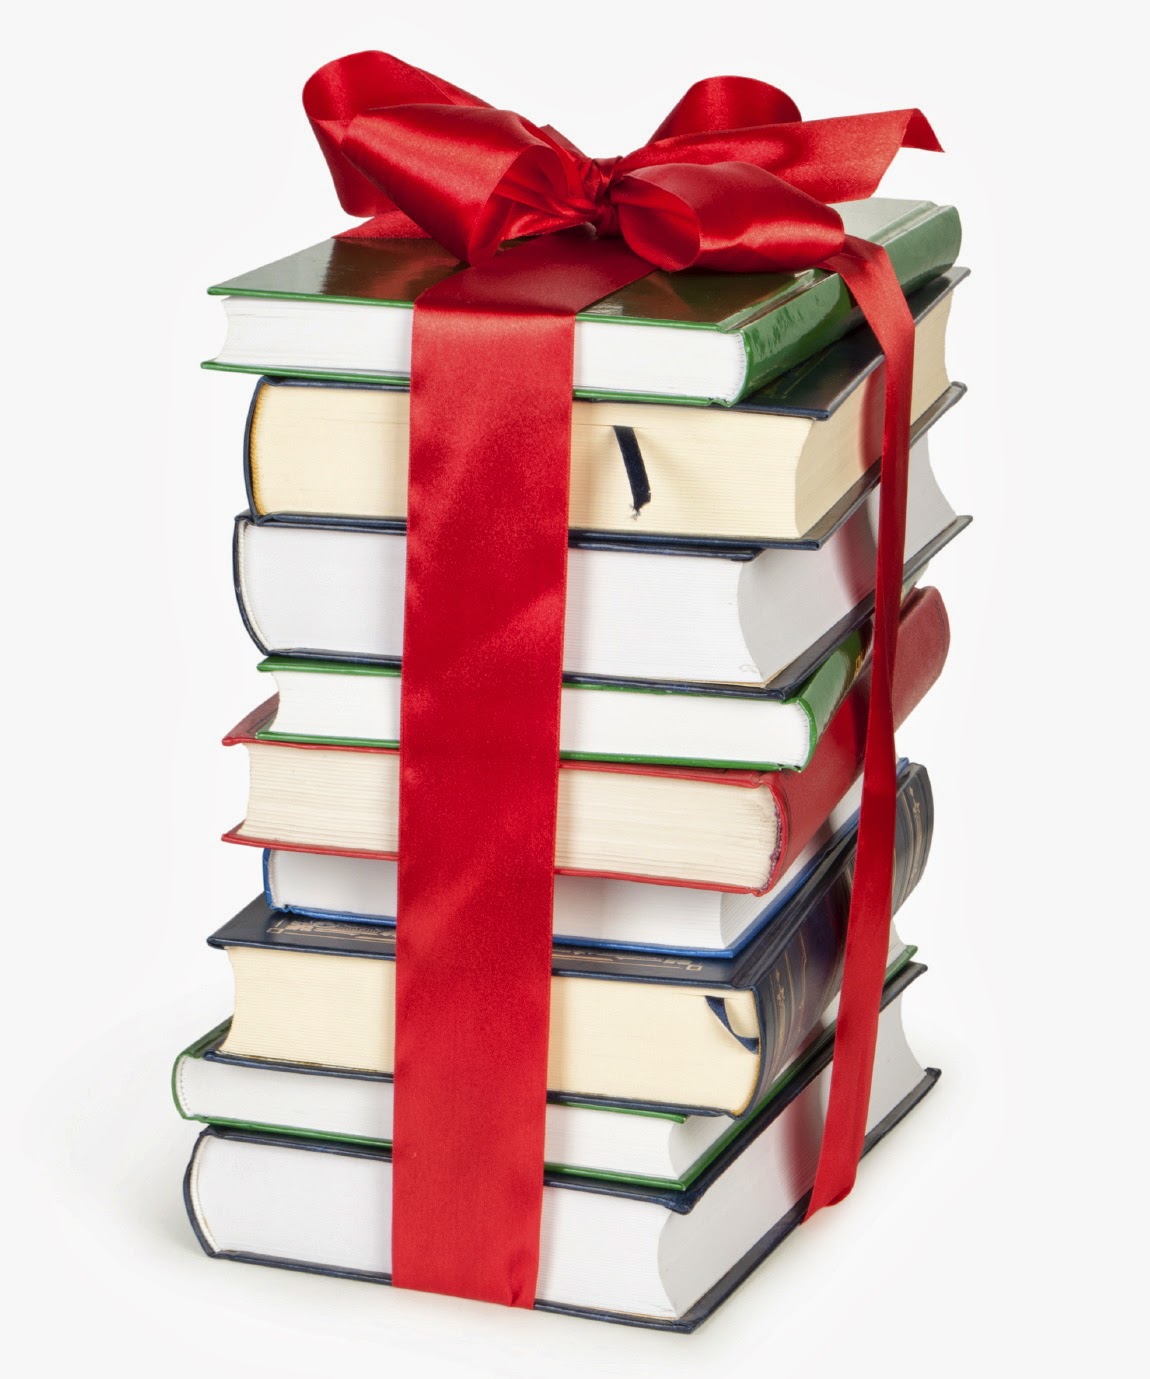 UPNE Blog Holiday Book Sale! Take 40 Off These Select Titles